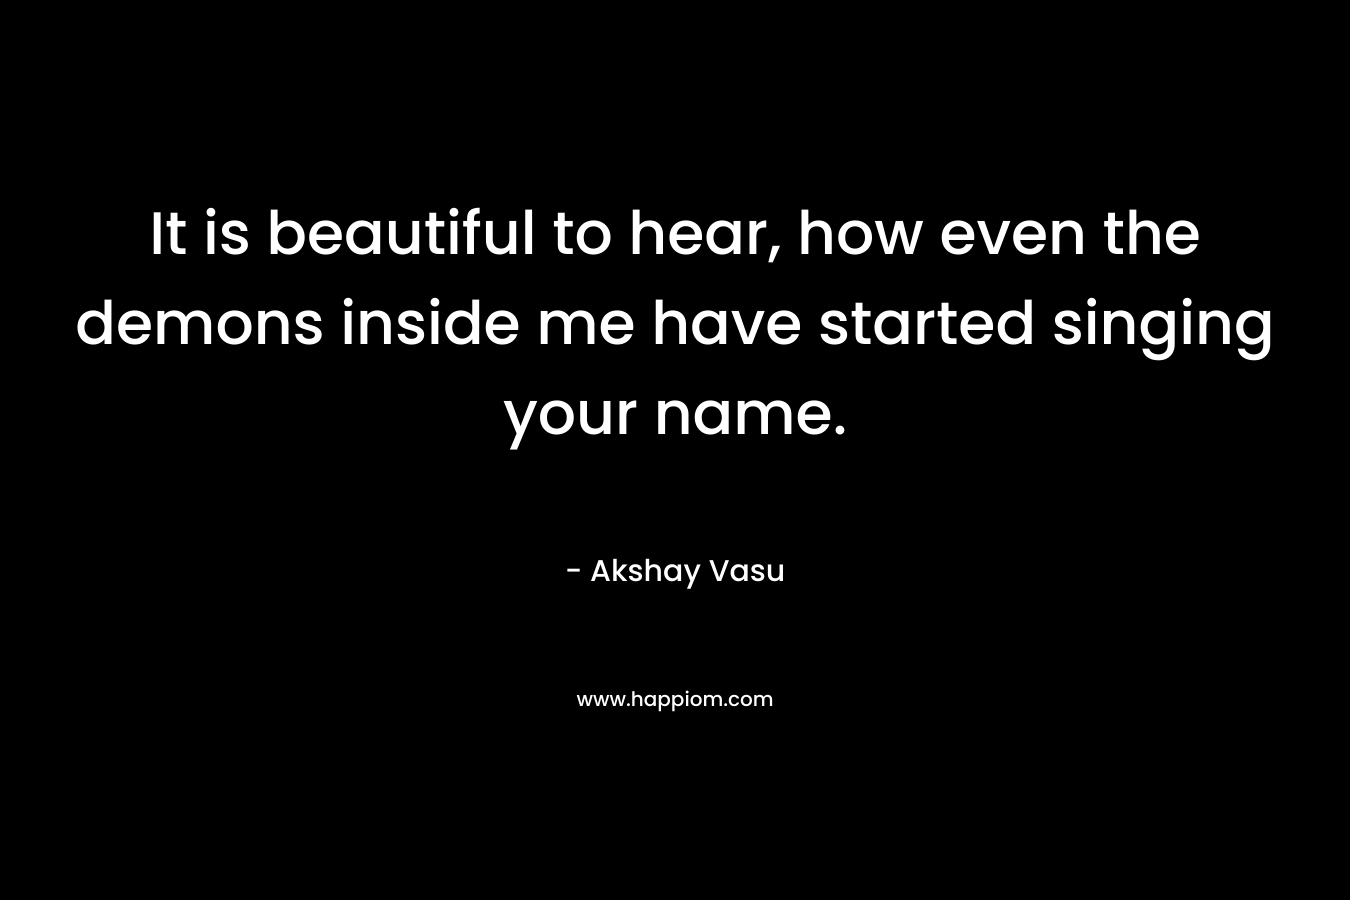 It is beautiful to hear, how even the demons inside me have started singing your name.